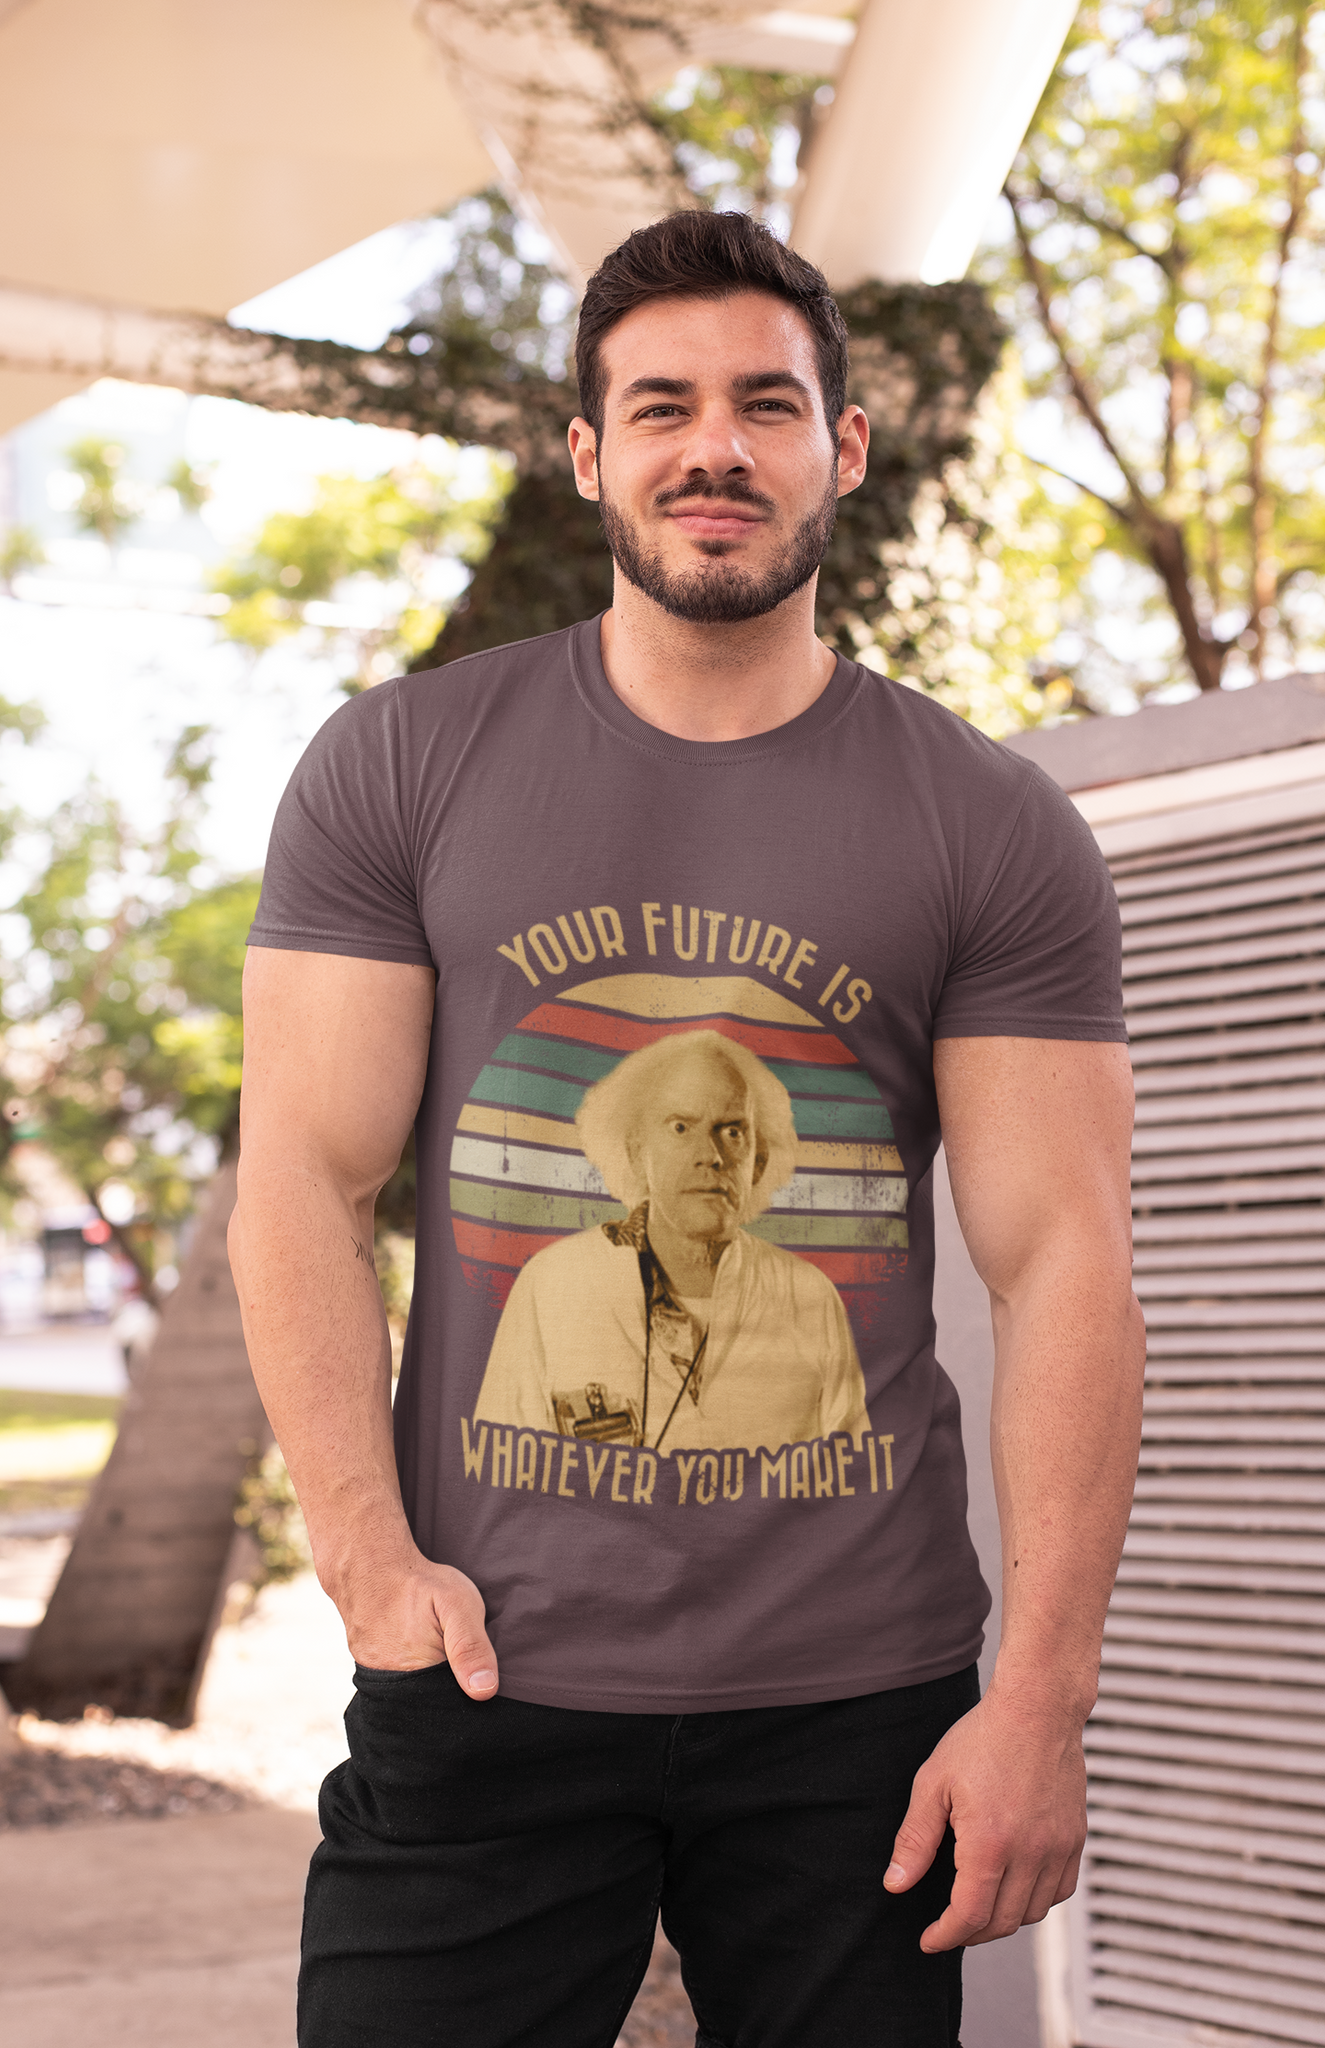 Back To The Future Vintage T Shirt, Your Future Is Whatever You Make It Tshirt, Doc Brown T Shirt